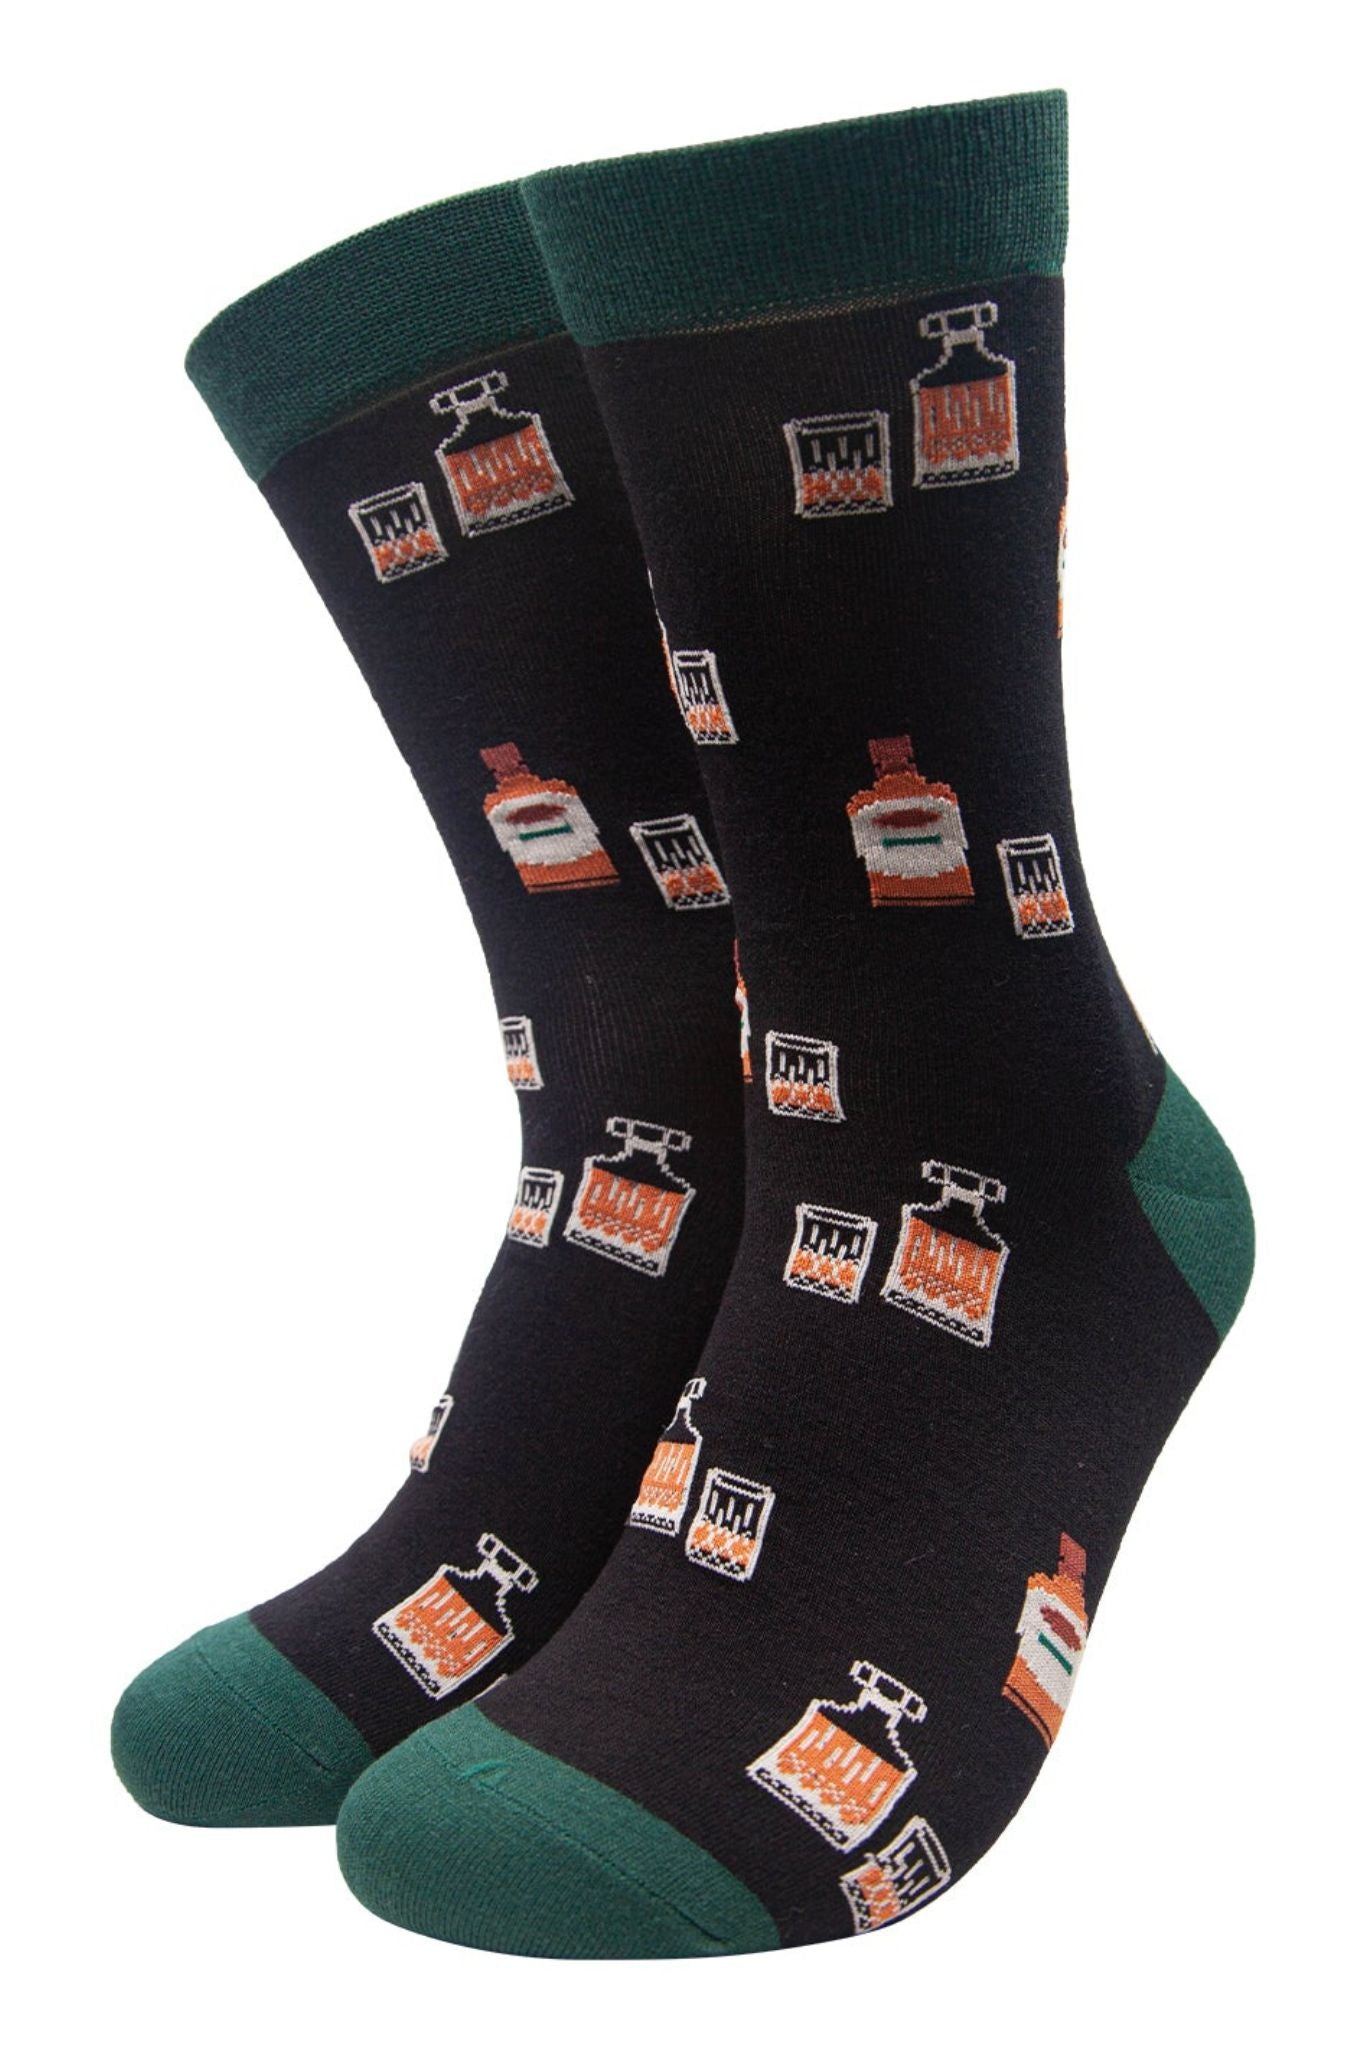 black bamboo dress socks featuring whisky glasses and decanters